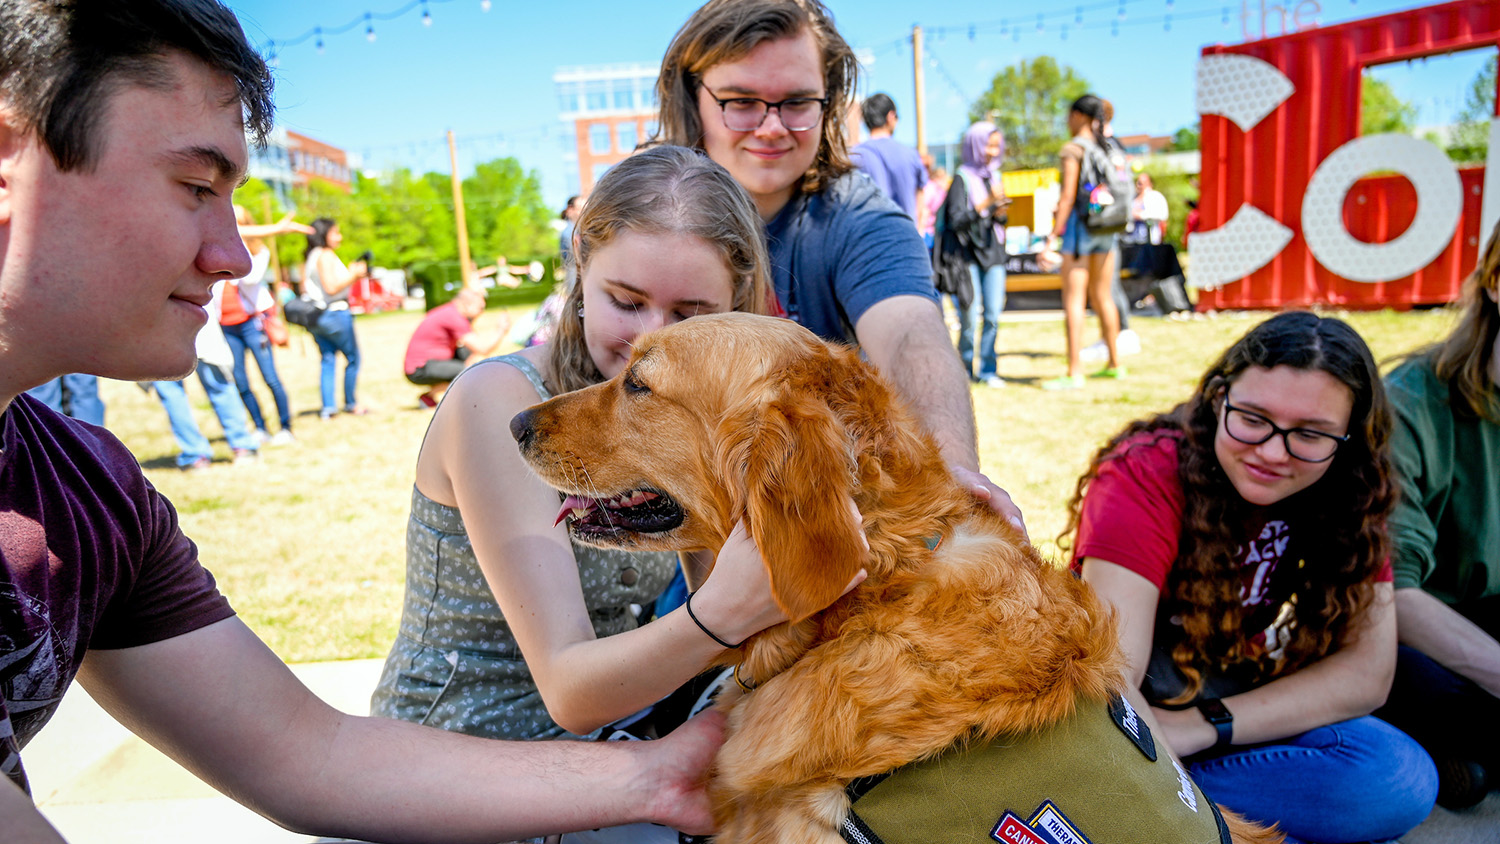 Students, faculty and staff enjoy a spring day by participating in a Pause for Tiny Hooves event at the Corner on Centennial campus. Therapy miniature horses from Stampede of Love, as well as therapy dogs, provide a wellness break from the end of semester rush. Photo by Becky Kirkland.